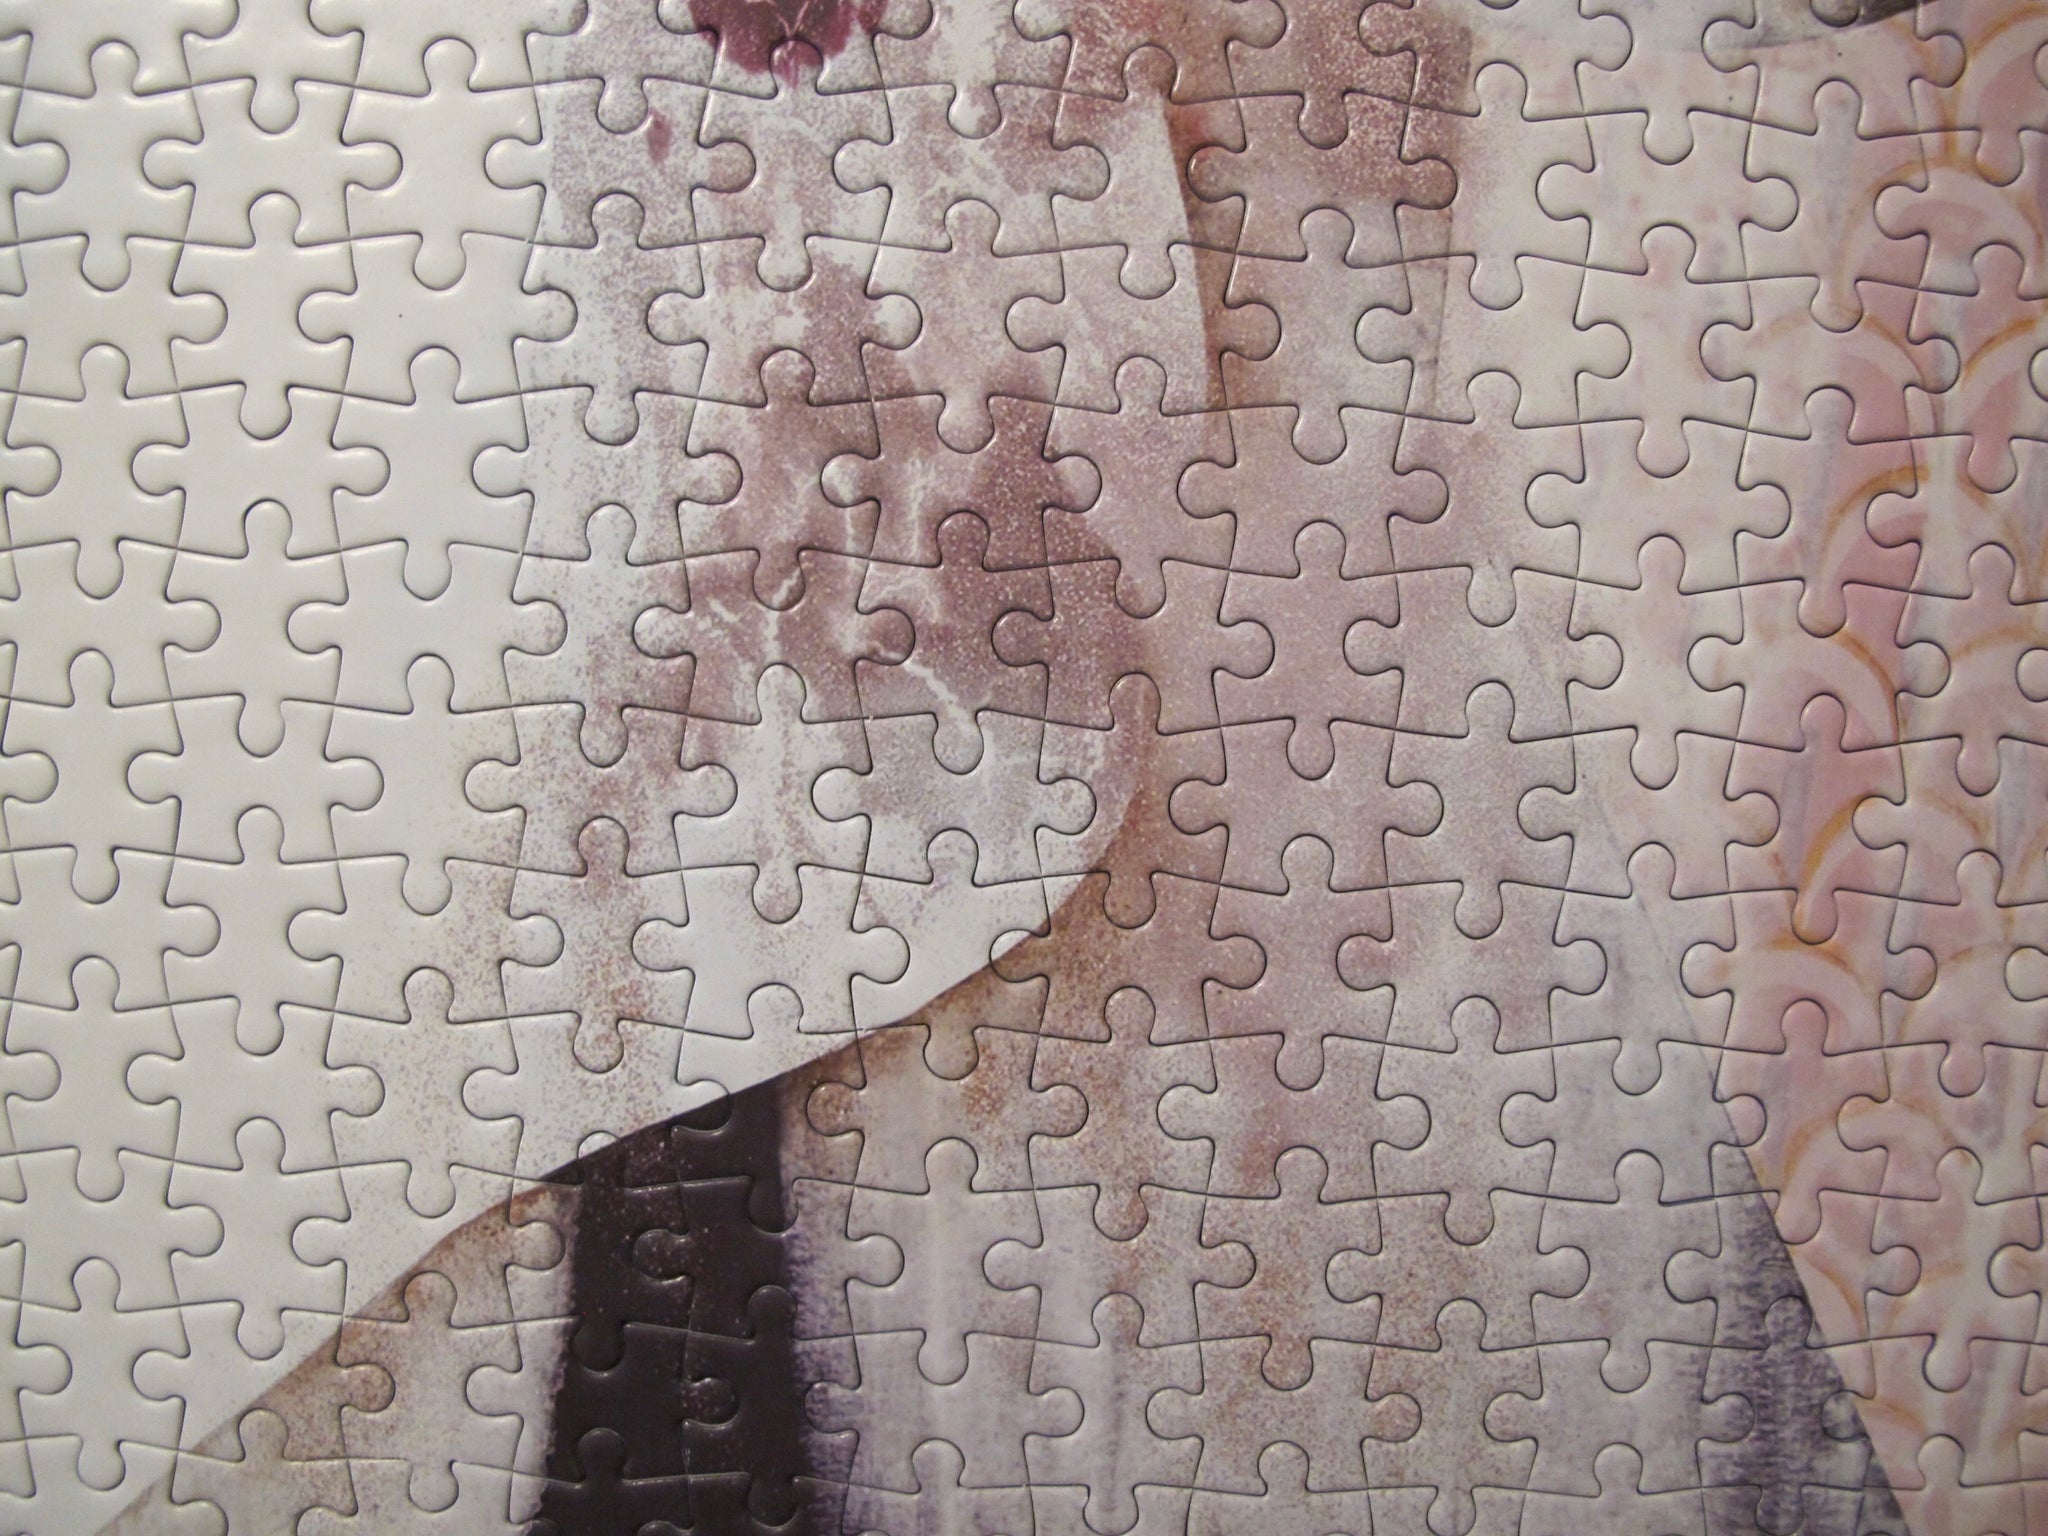 Artist Carrie Moyer Puzzle: Unlimited Collector Edition Jigsaw Puzzle